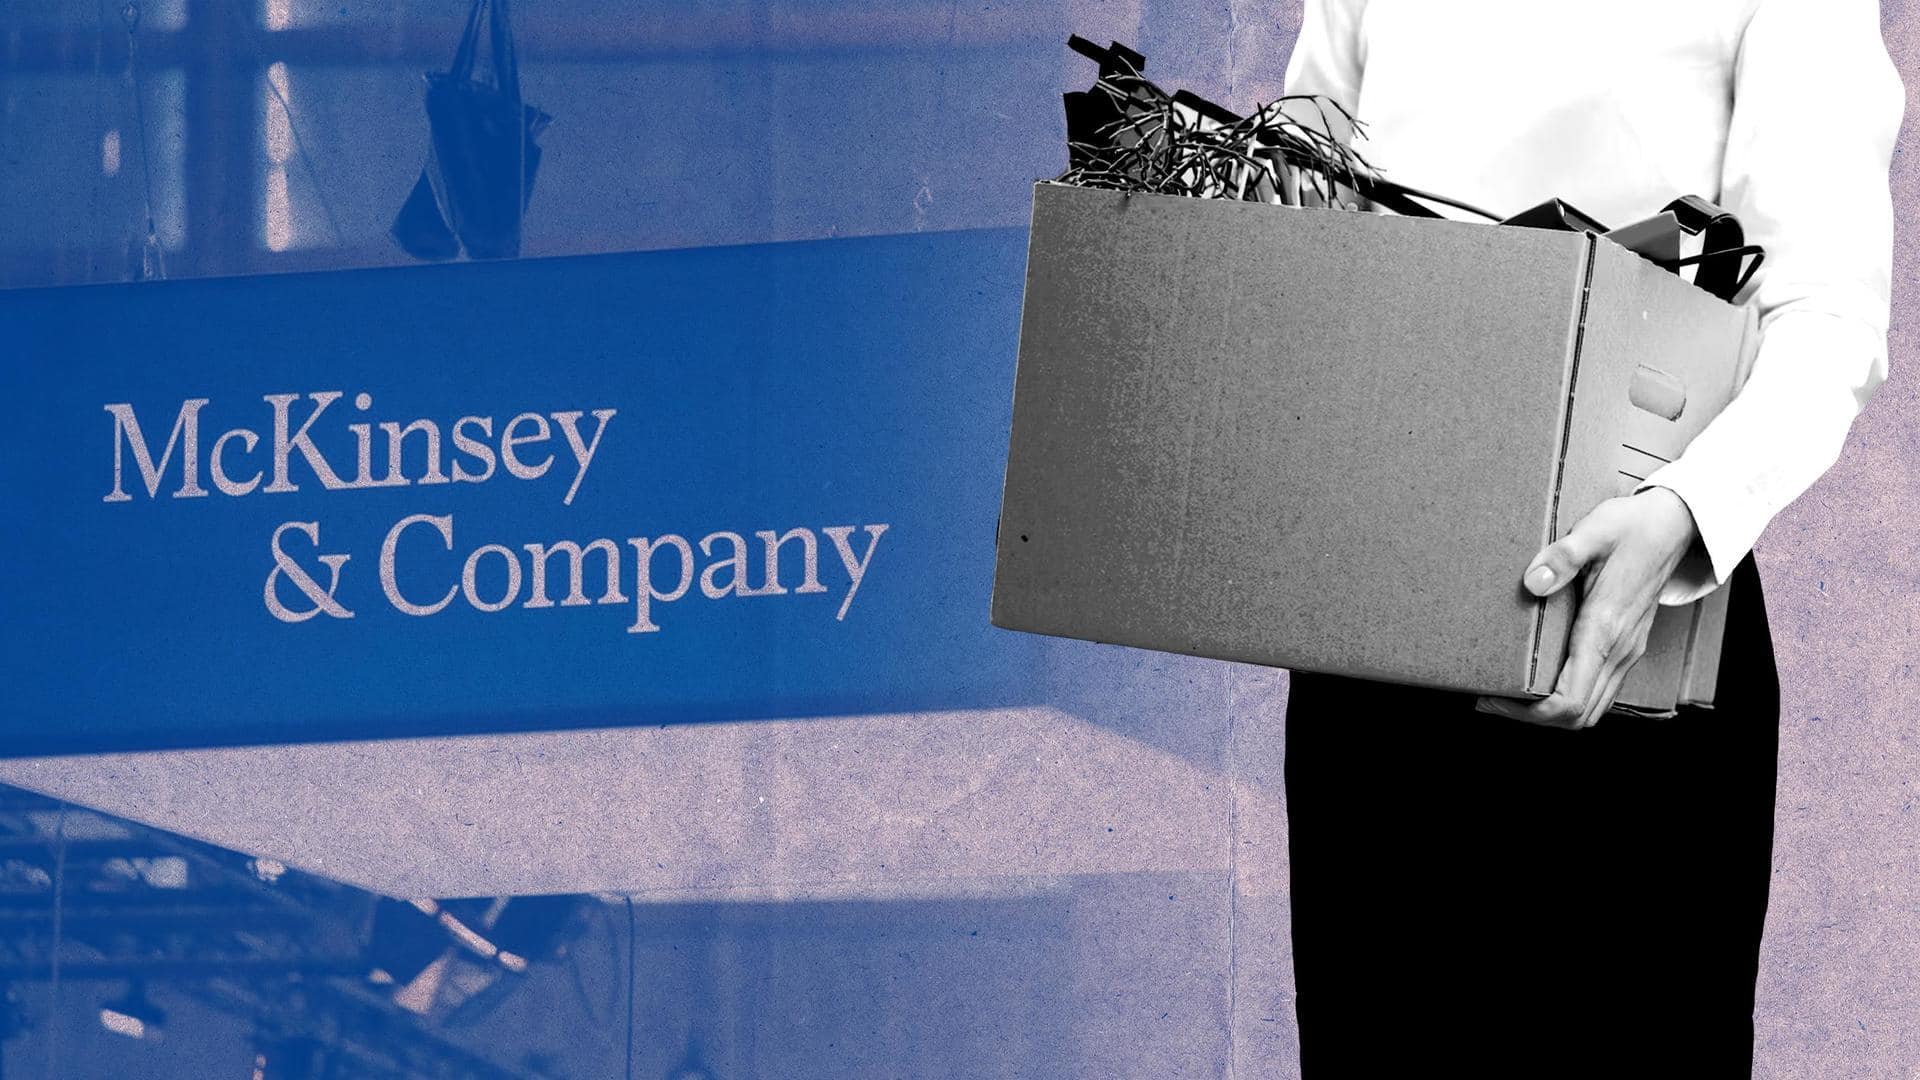 Consulting giant McKinsey plans to layoff 2,000 employees